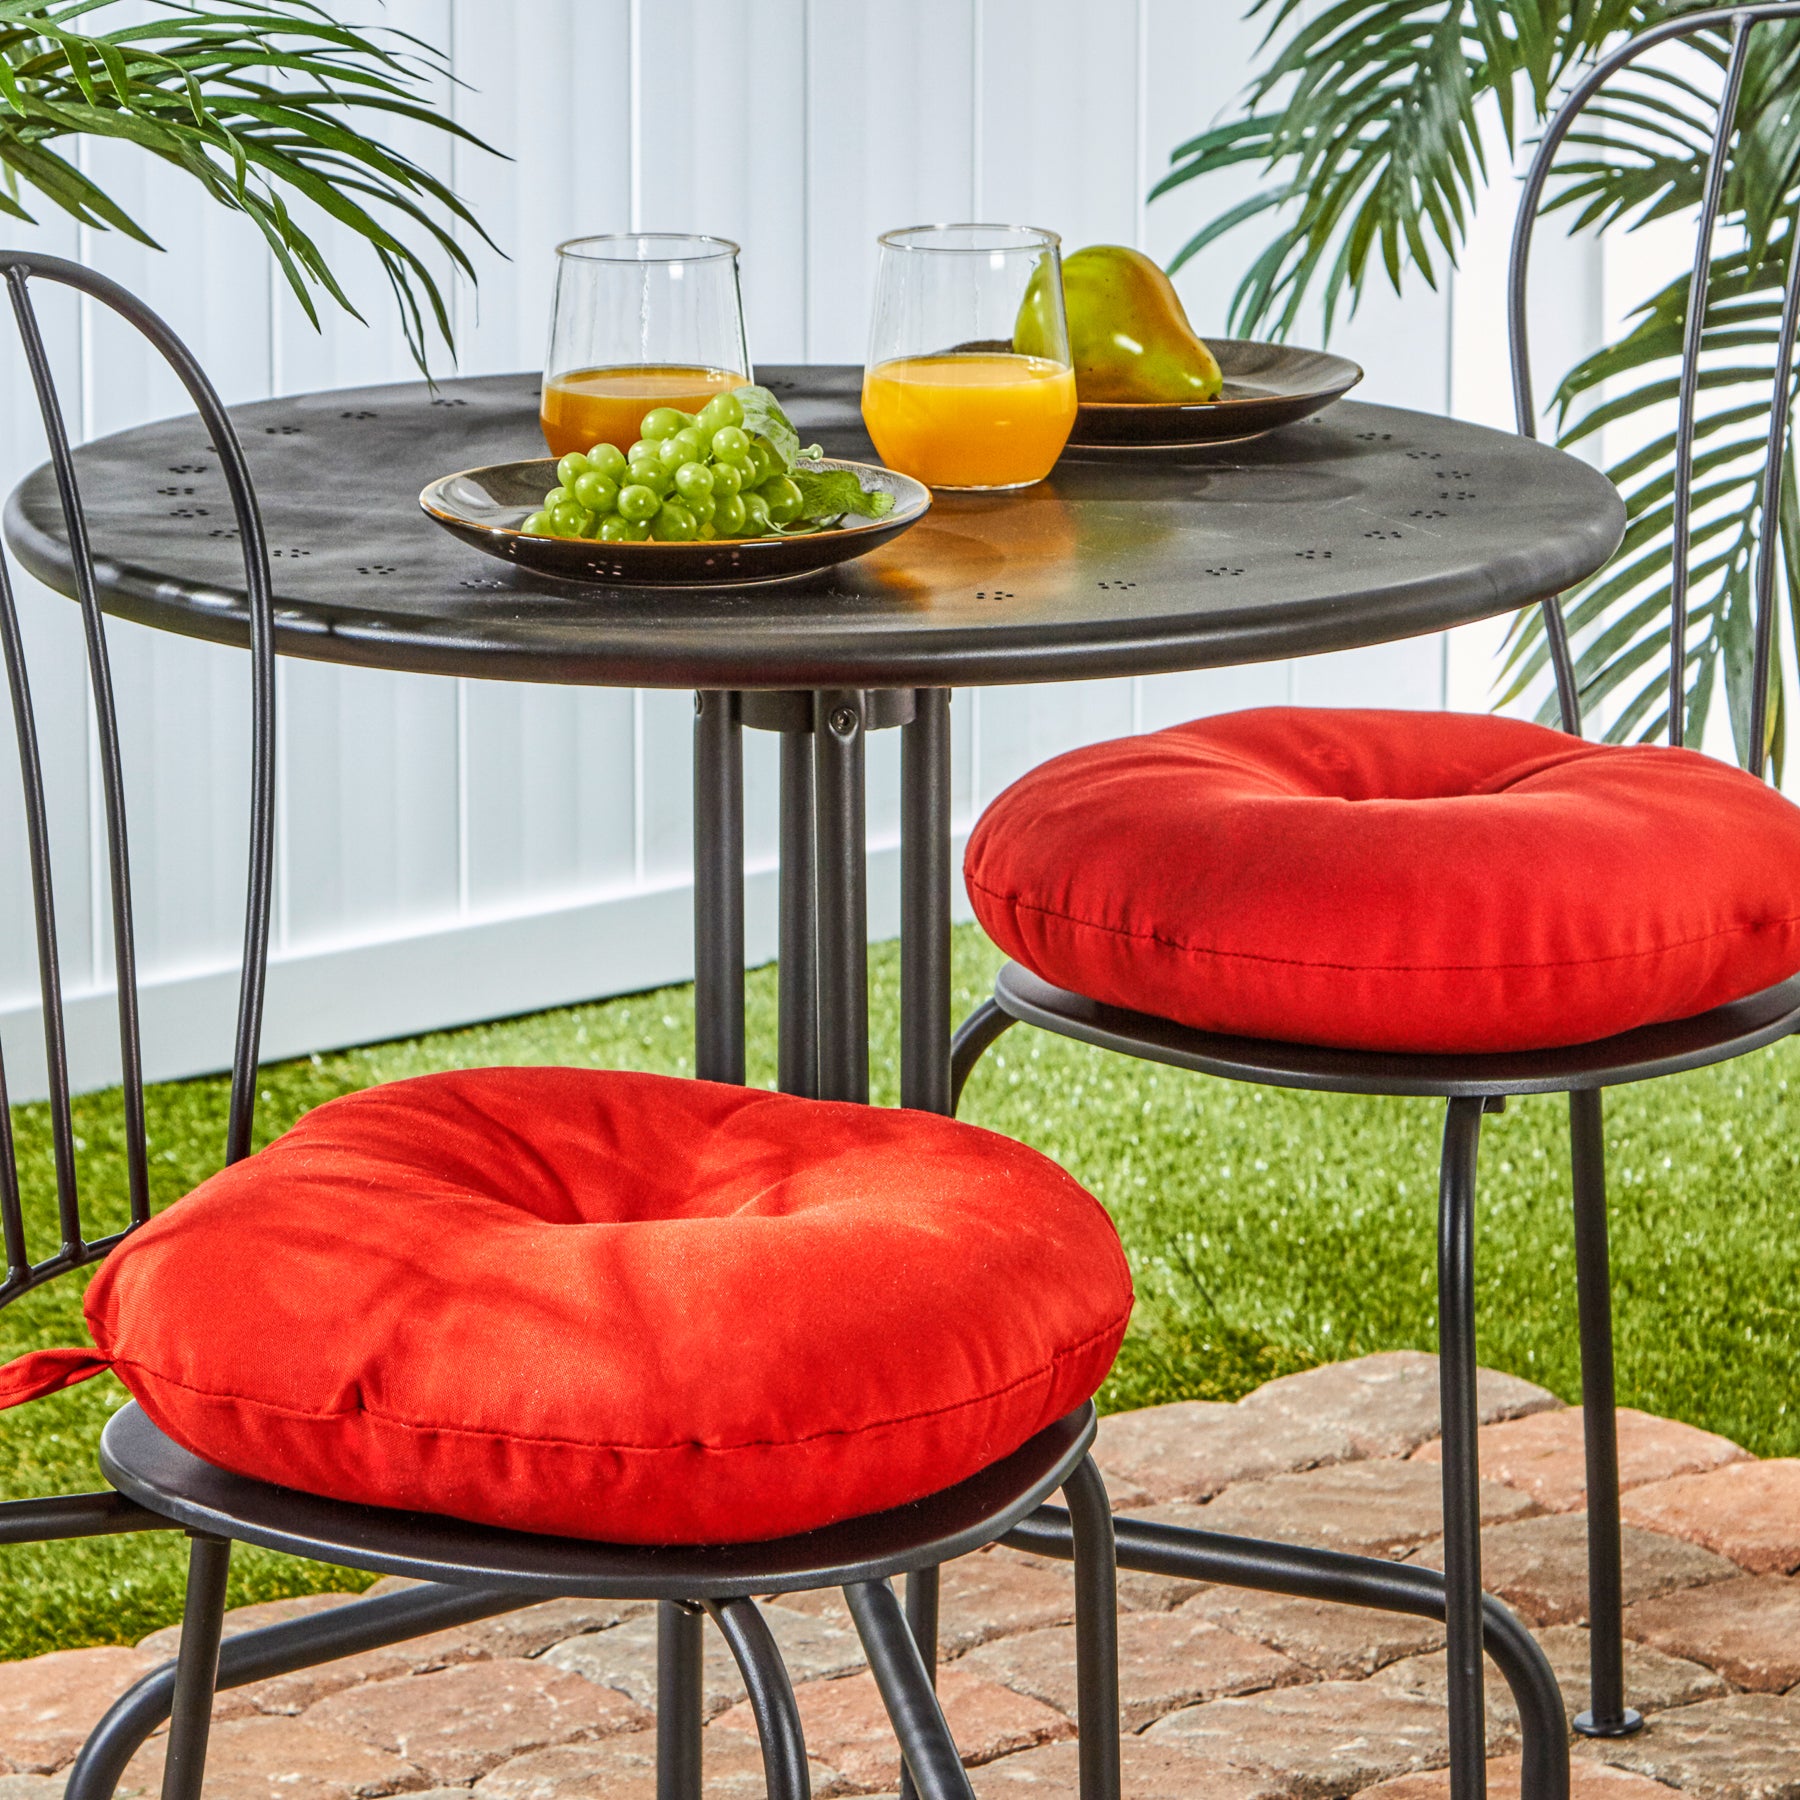 Greendale Home Fashions Denim 15 in. Round Outdoor Reversible Bistro Seat Cushion (Set of 2) - image 3 of 70